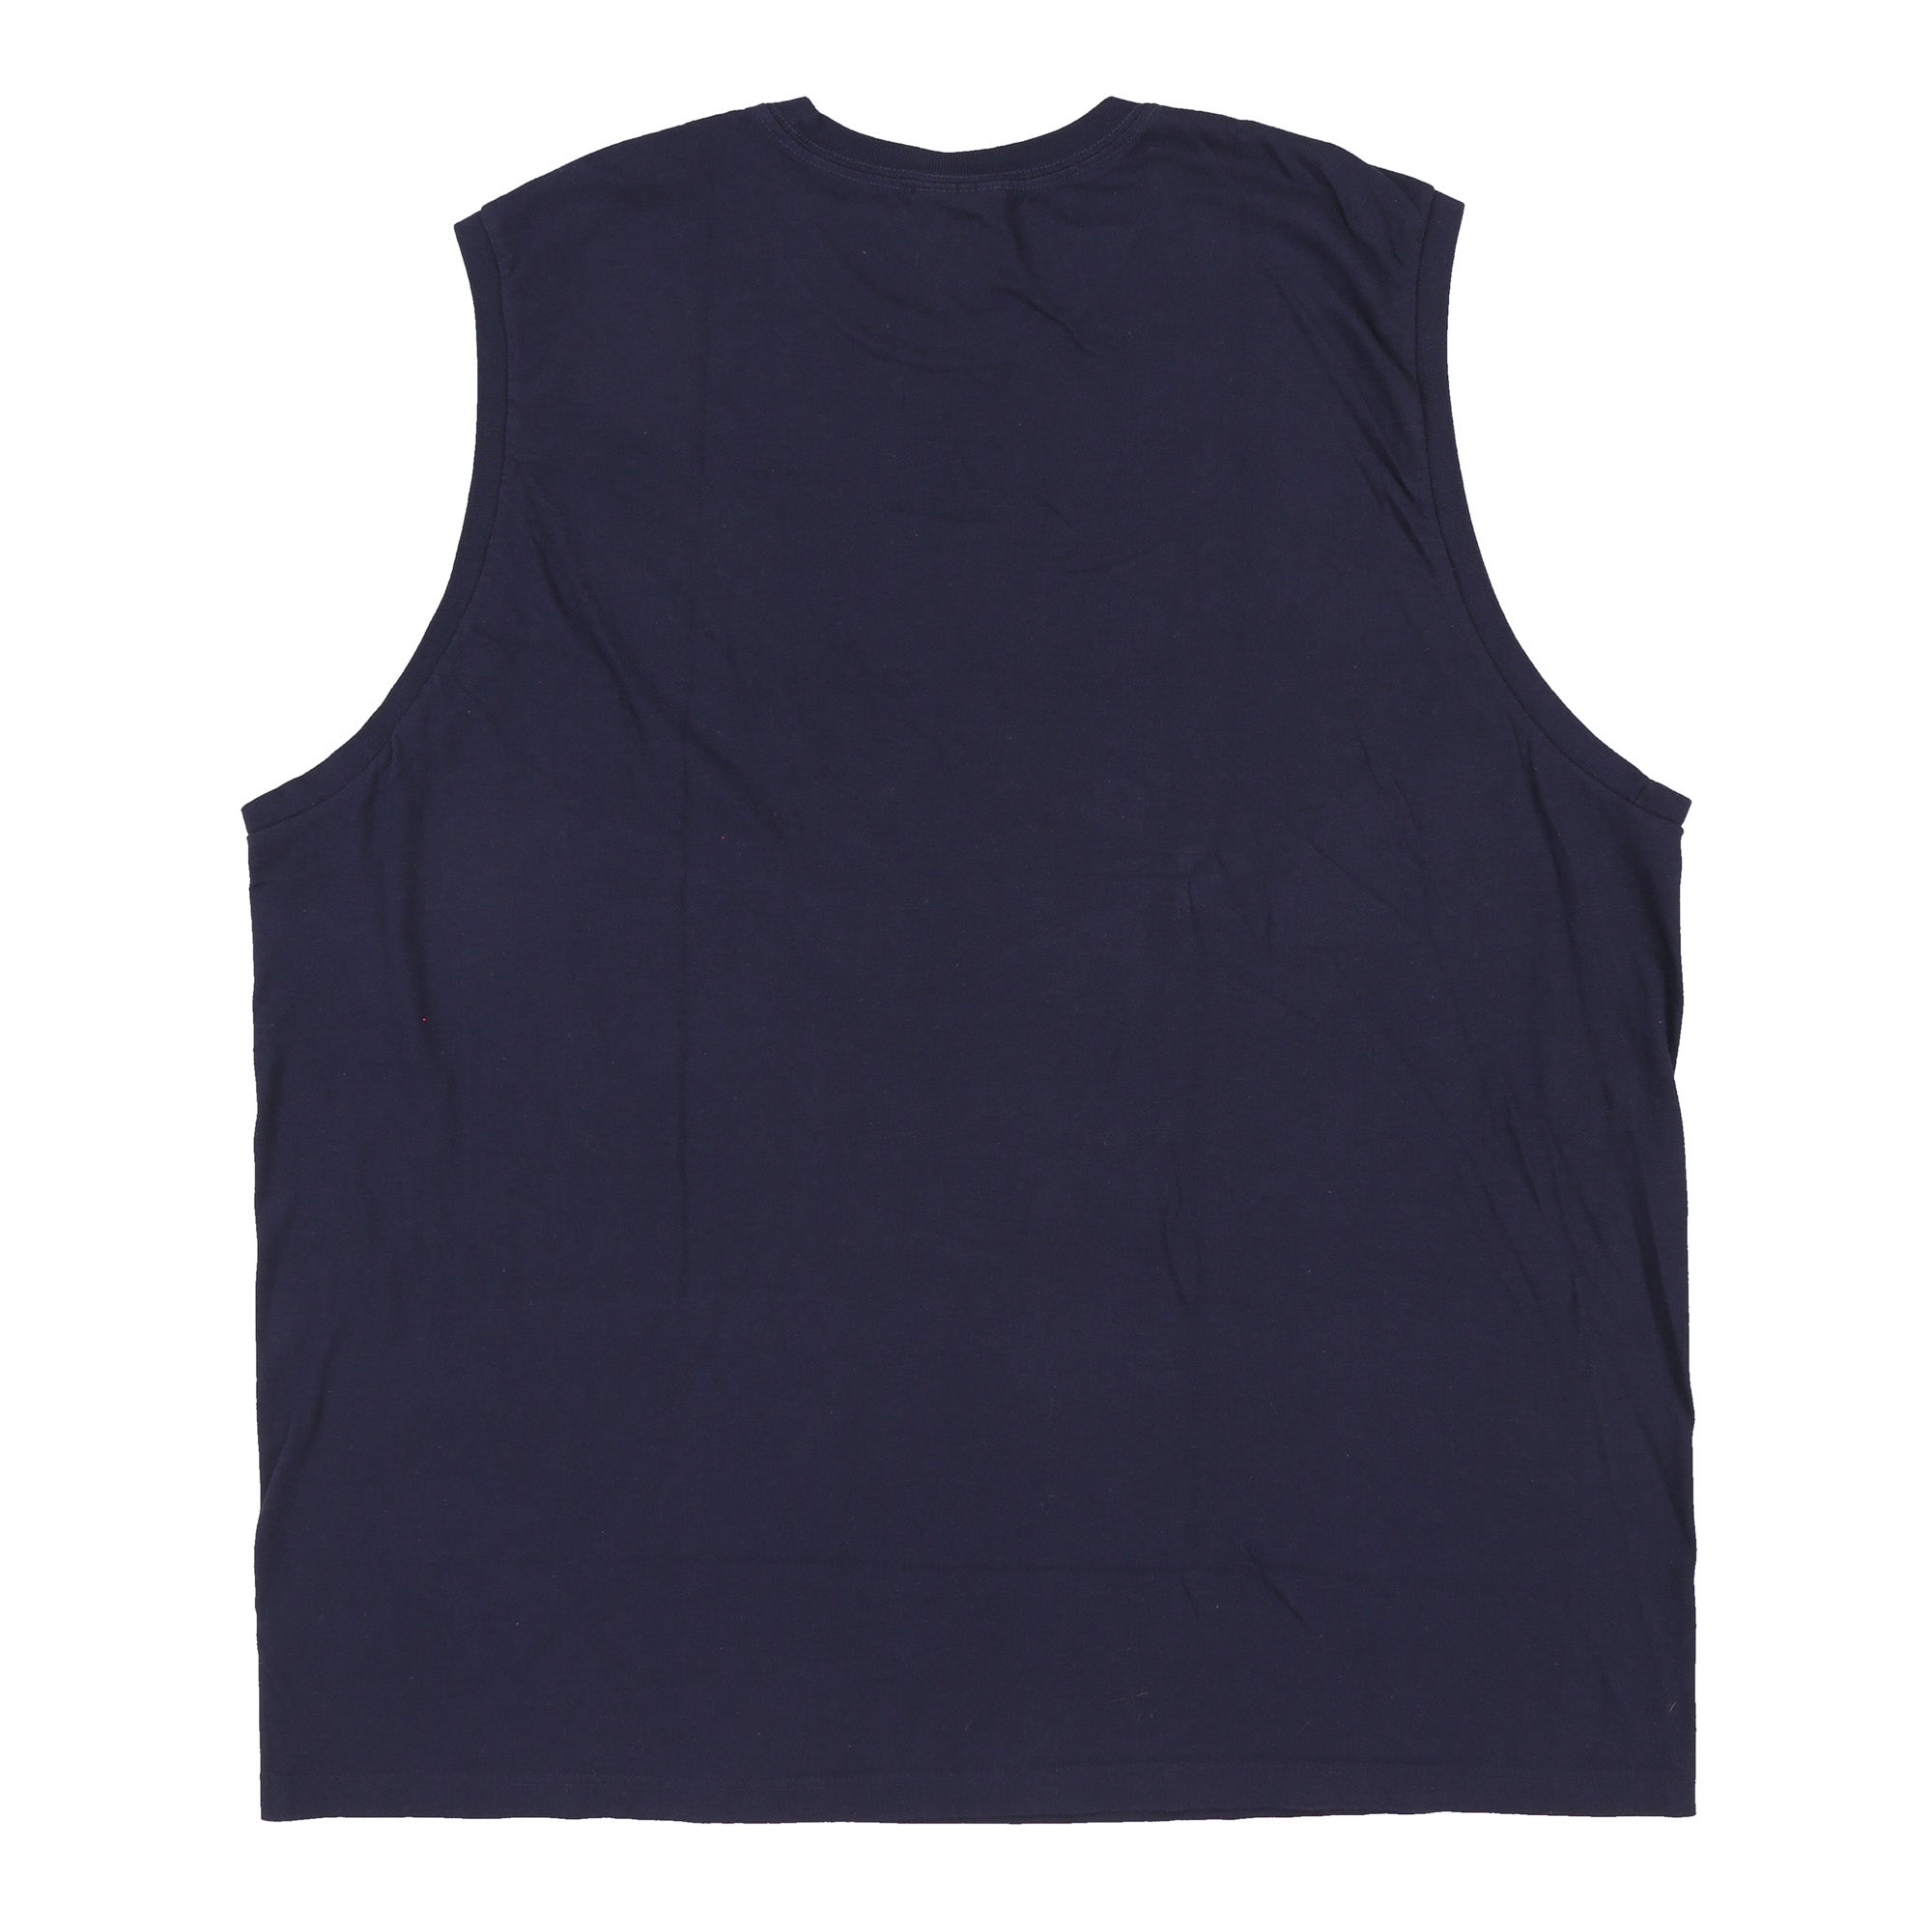 POLO SPORT SPELL OUT TANK TOP // NAVY